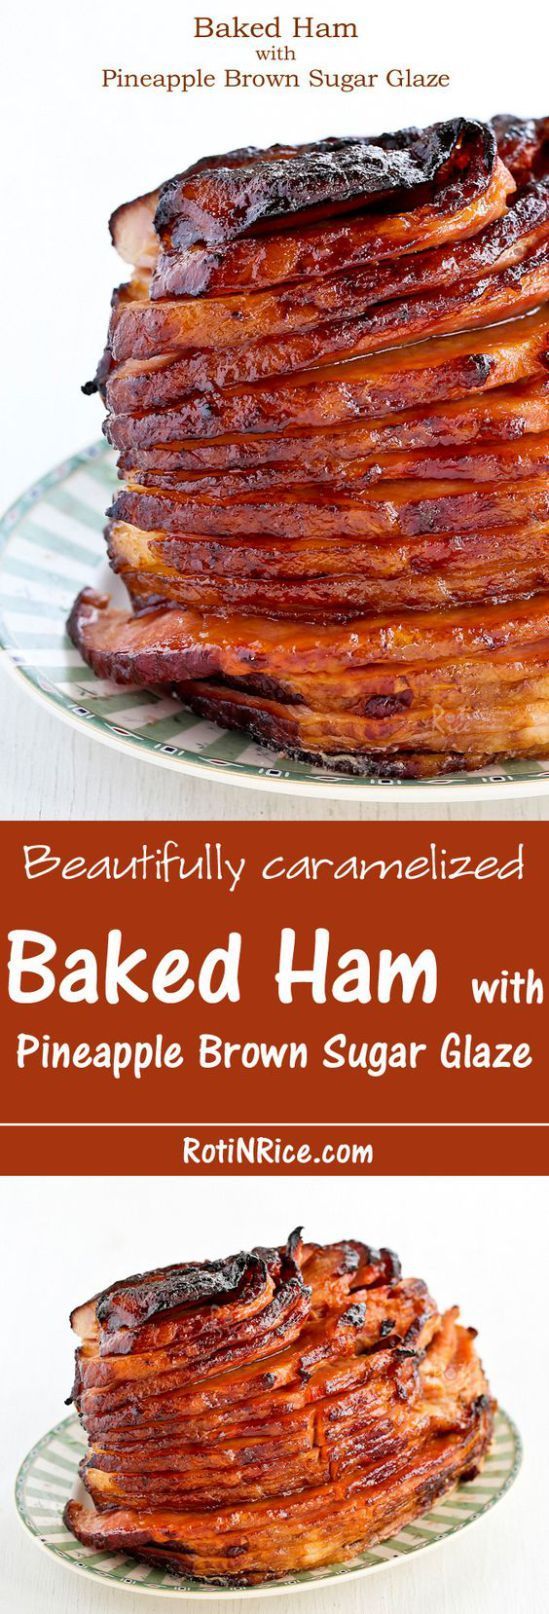 Beautifully caramelized Baked Ham with Pineapple Brown Sugar Glaze Recipe – a perfect alternative or addition to the Thanksgiving